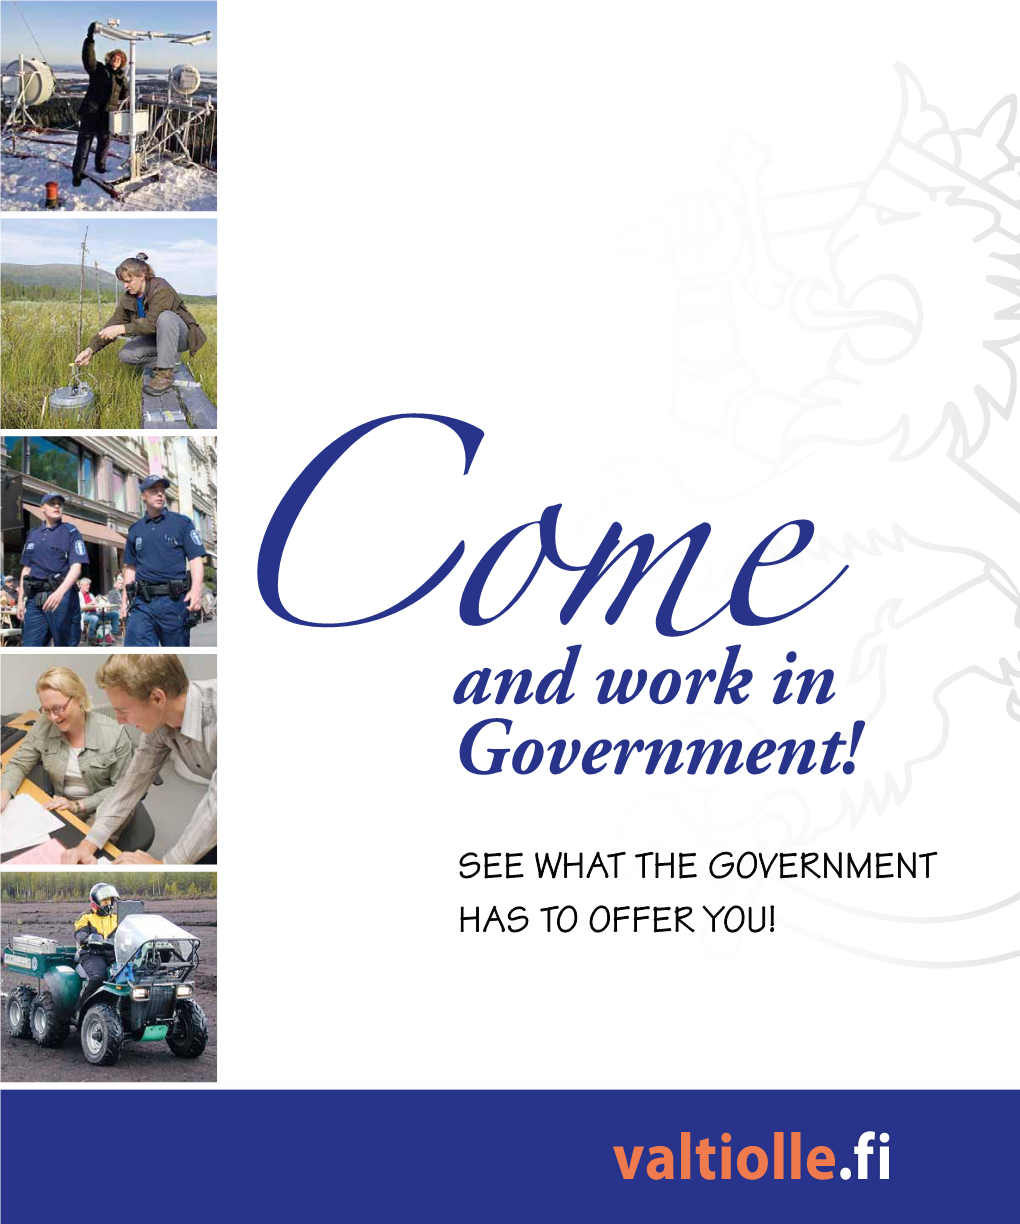 And Work in Government! Comesee WHAT the GOVERNMENT HAS to OFFER YOU! Valtiolle.Fi – the GOVERNMENT RECRUITMENT CHANNEL